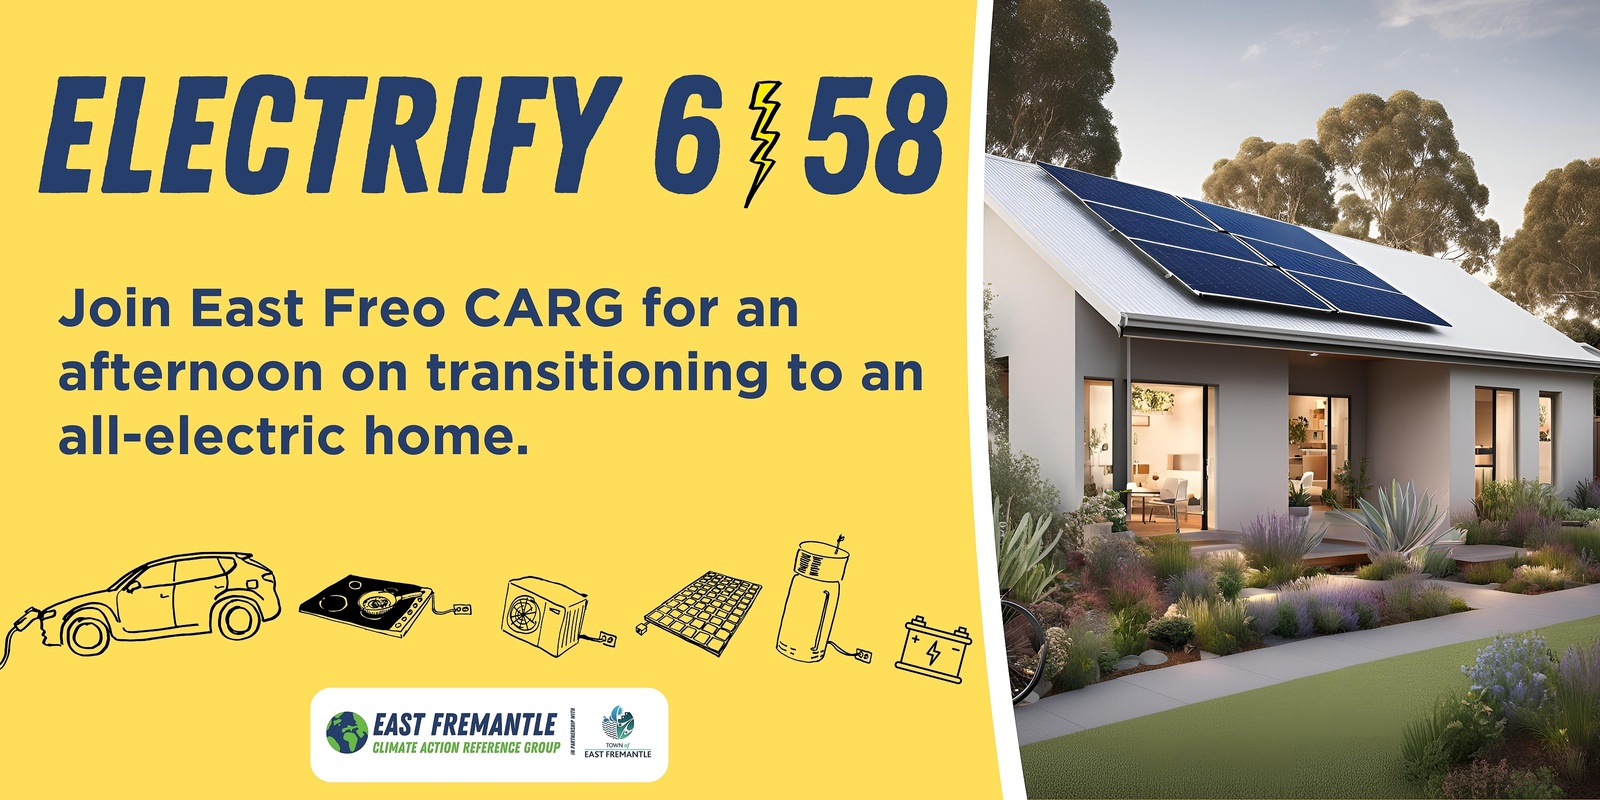 Banner image for Electrify 6158 - Transition to an all-electric home